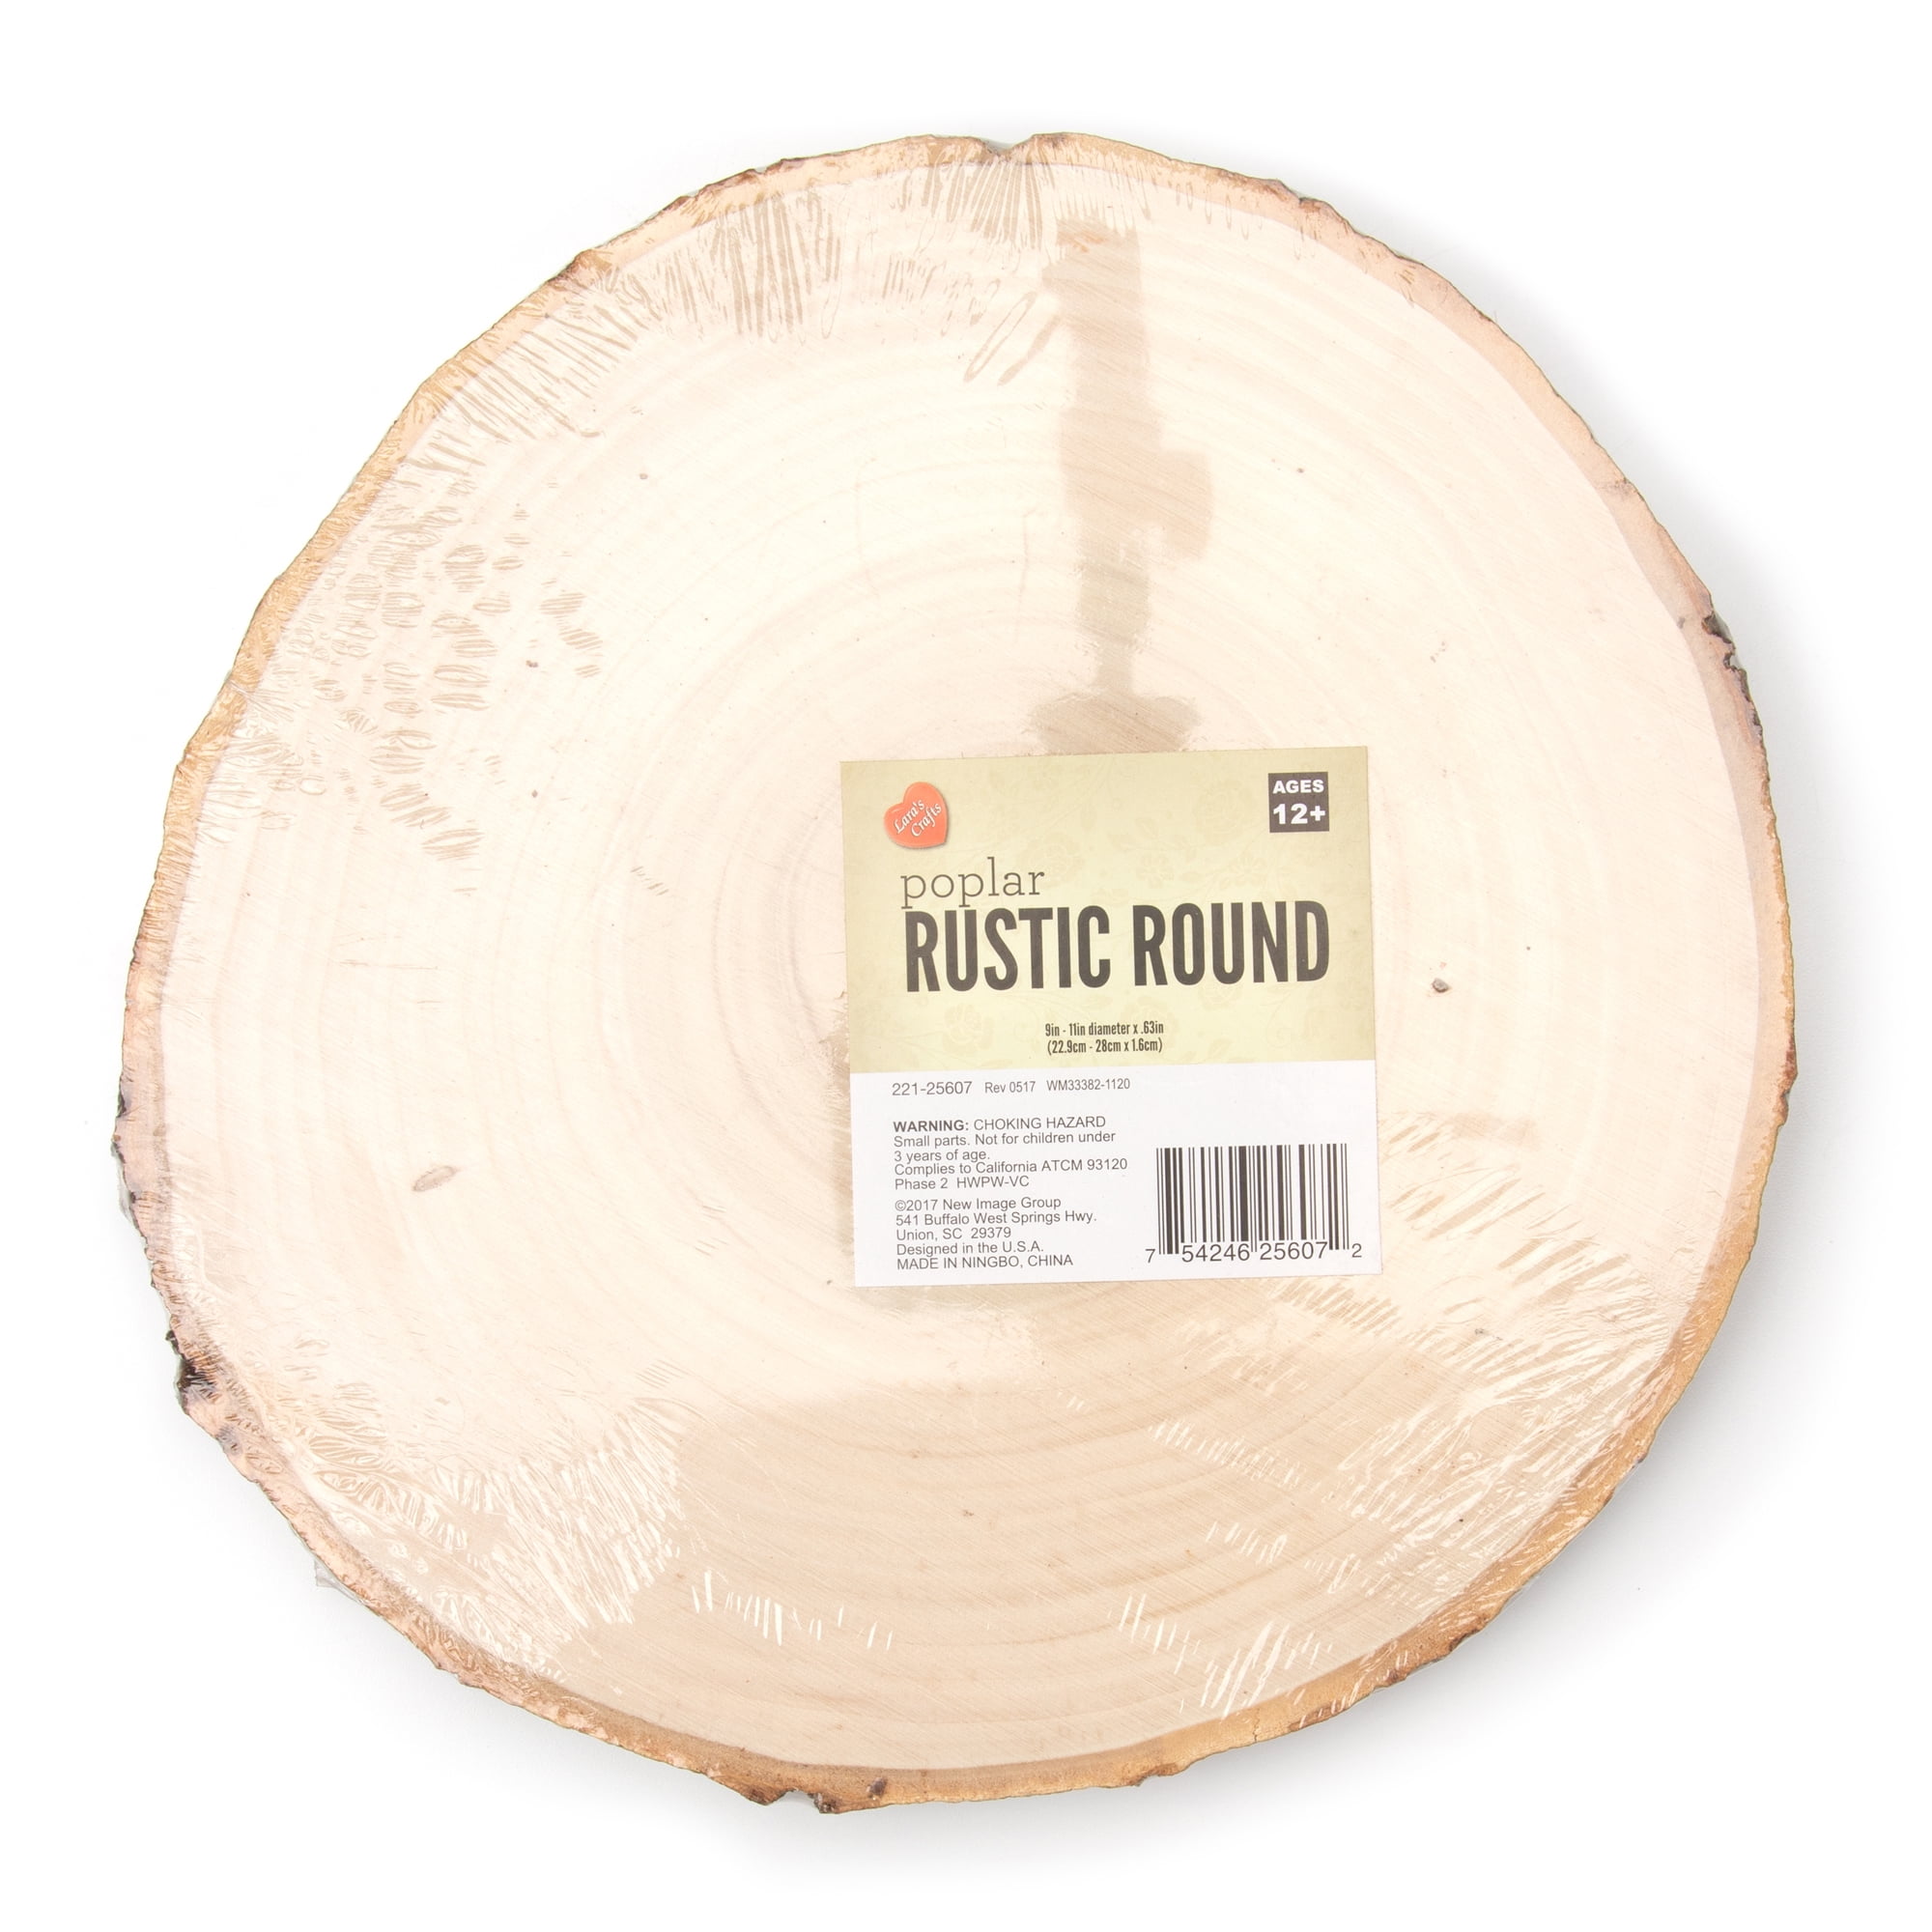 Cousin DIY 10 inch Round Rustic Poplar Wood with Bark Plaque, Size: 10 inch, Brown